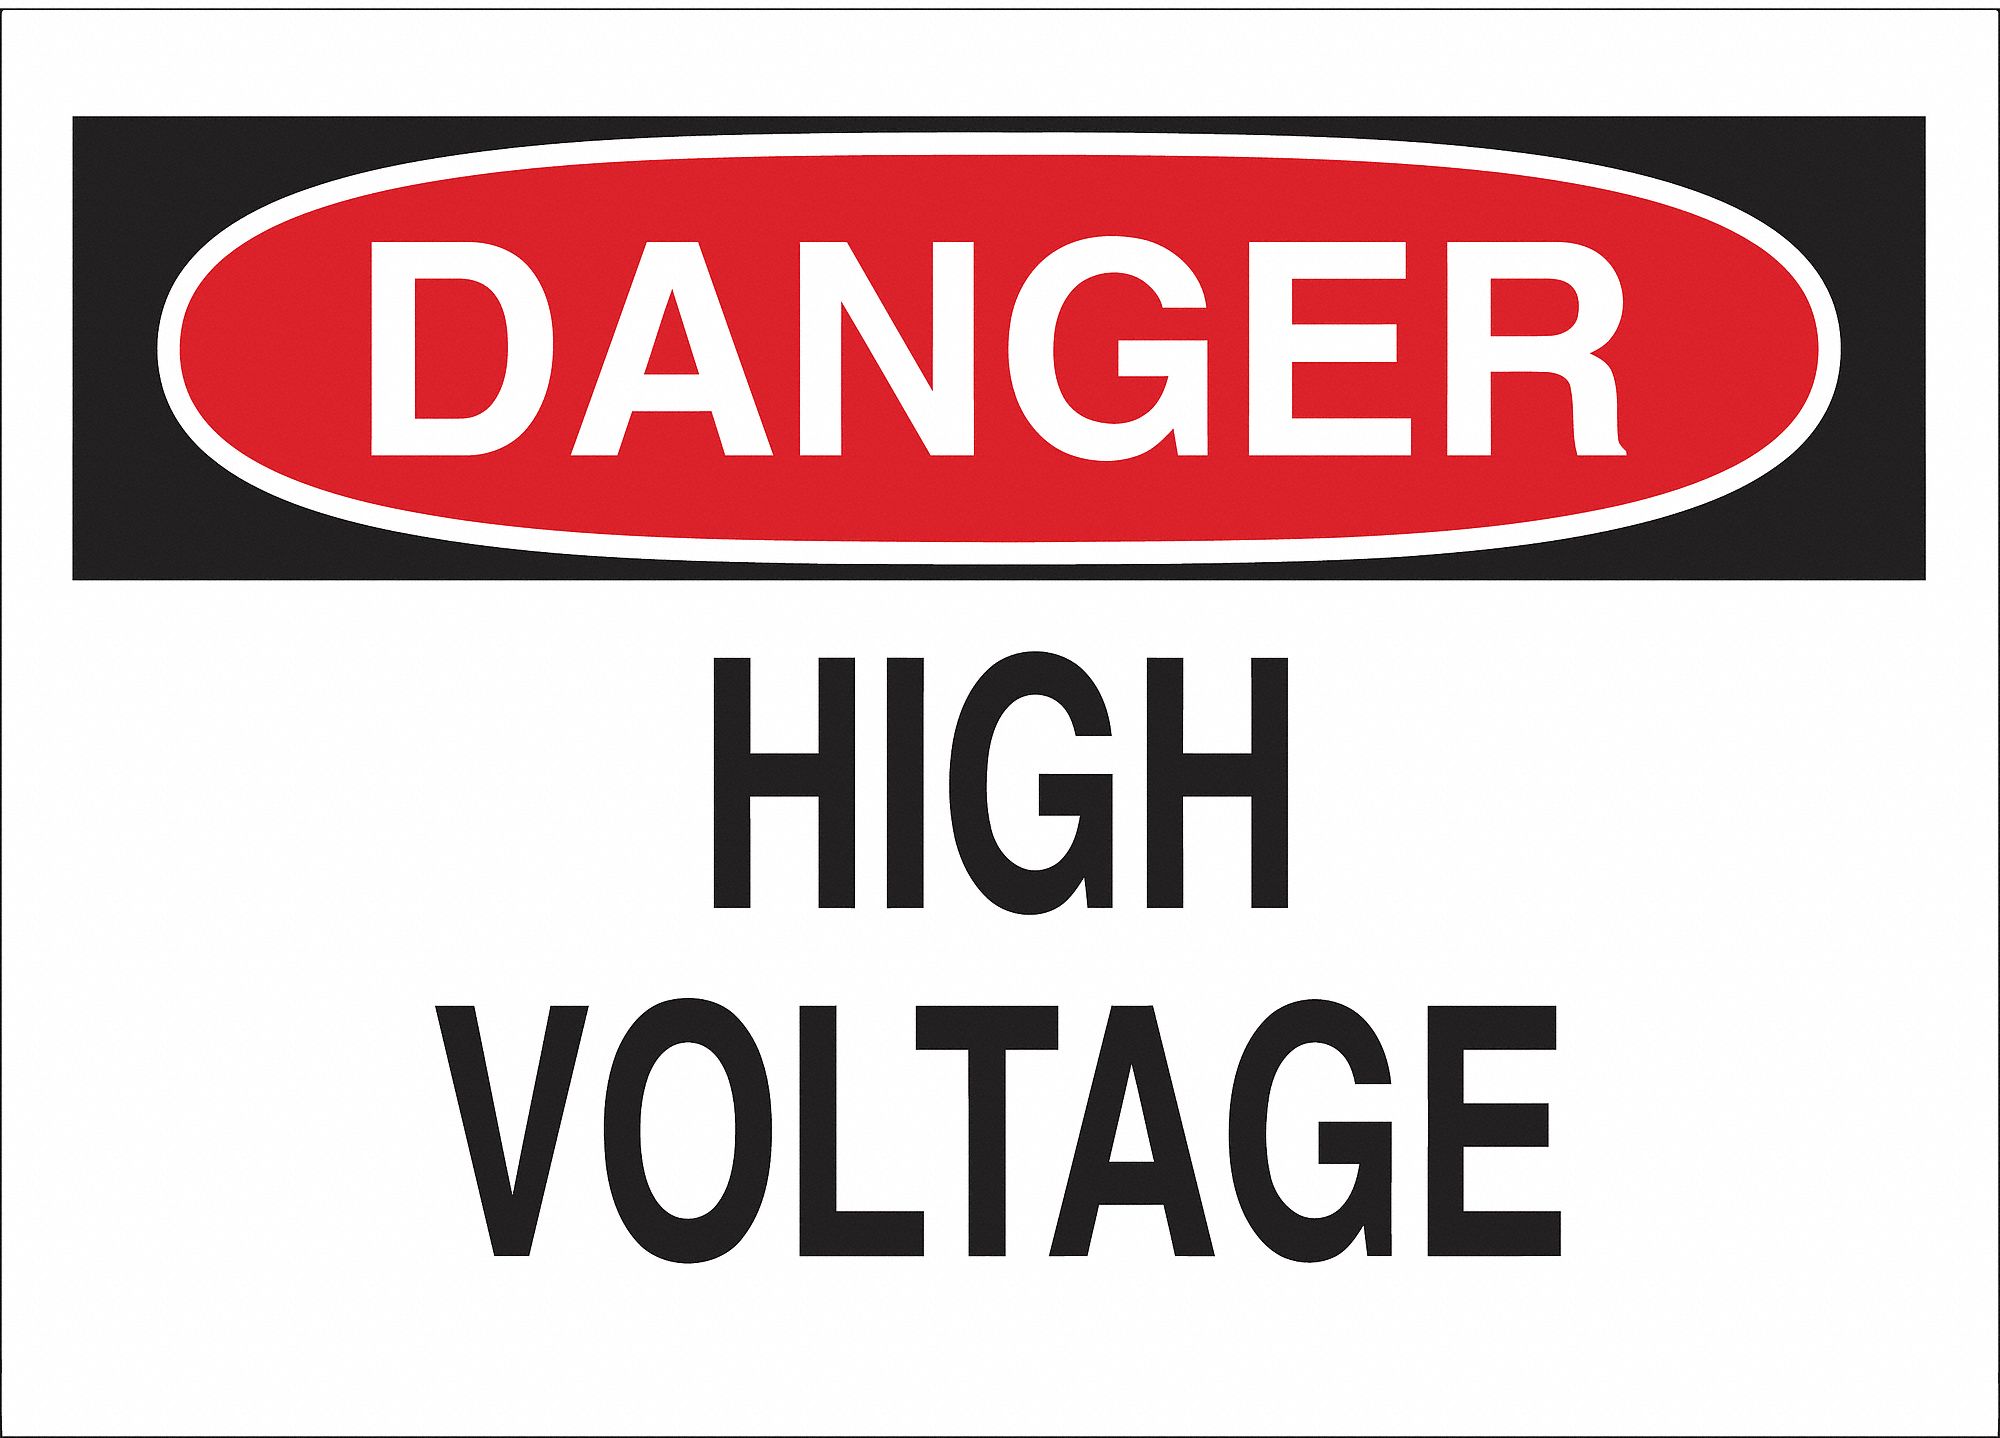 HIGH VOLTAGE DANGER SIGN, ADHESIVE, BLACK/RED/WHITE, 7 X 10 IN